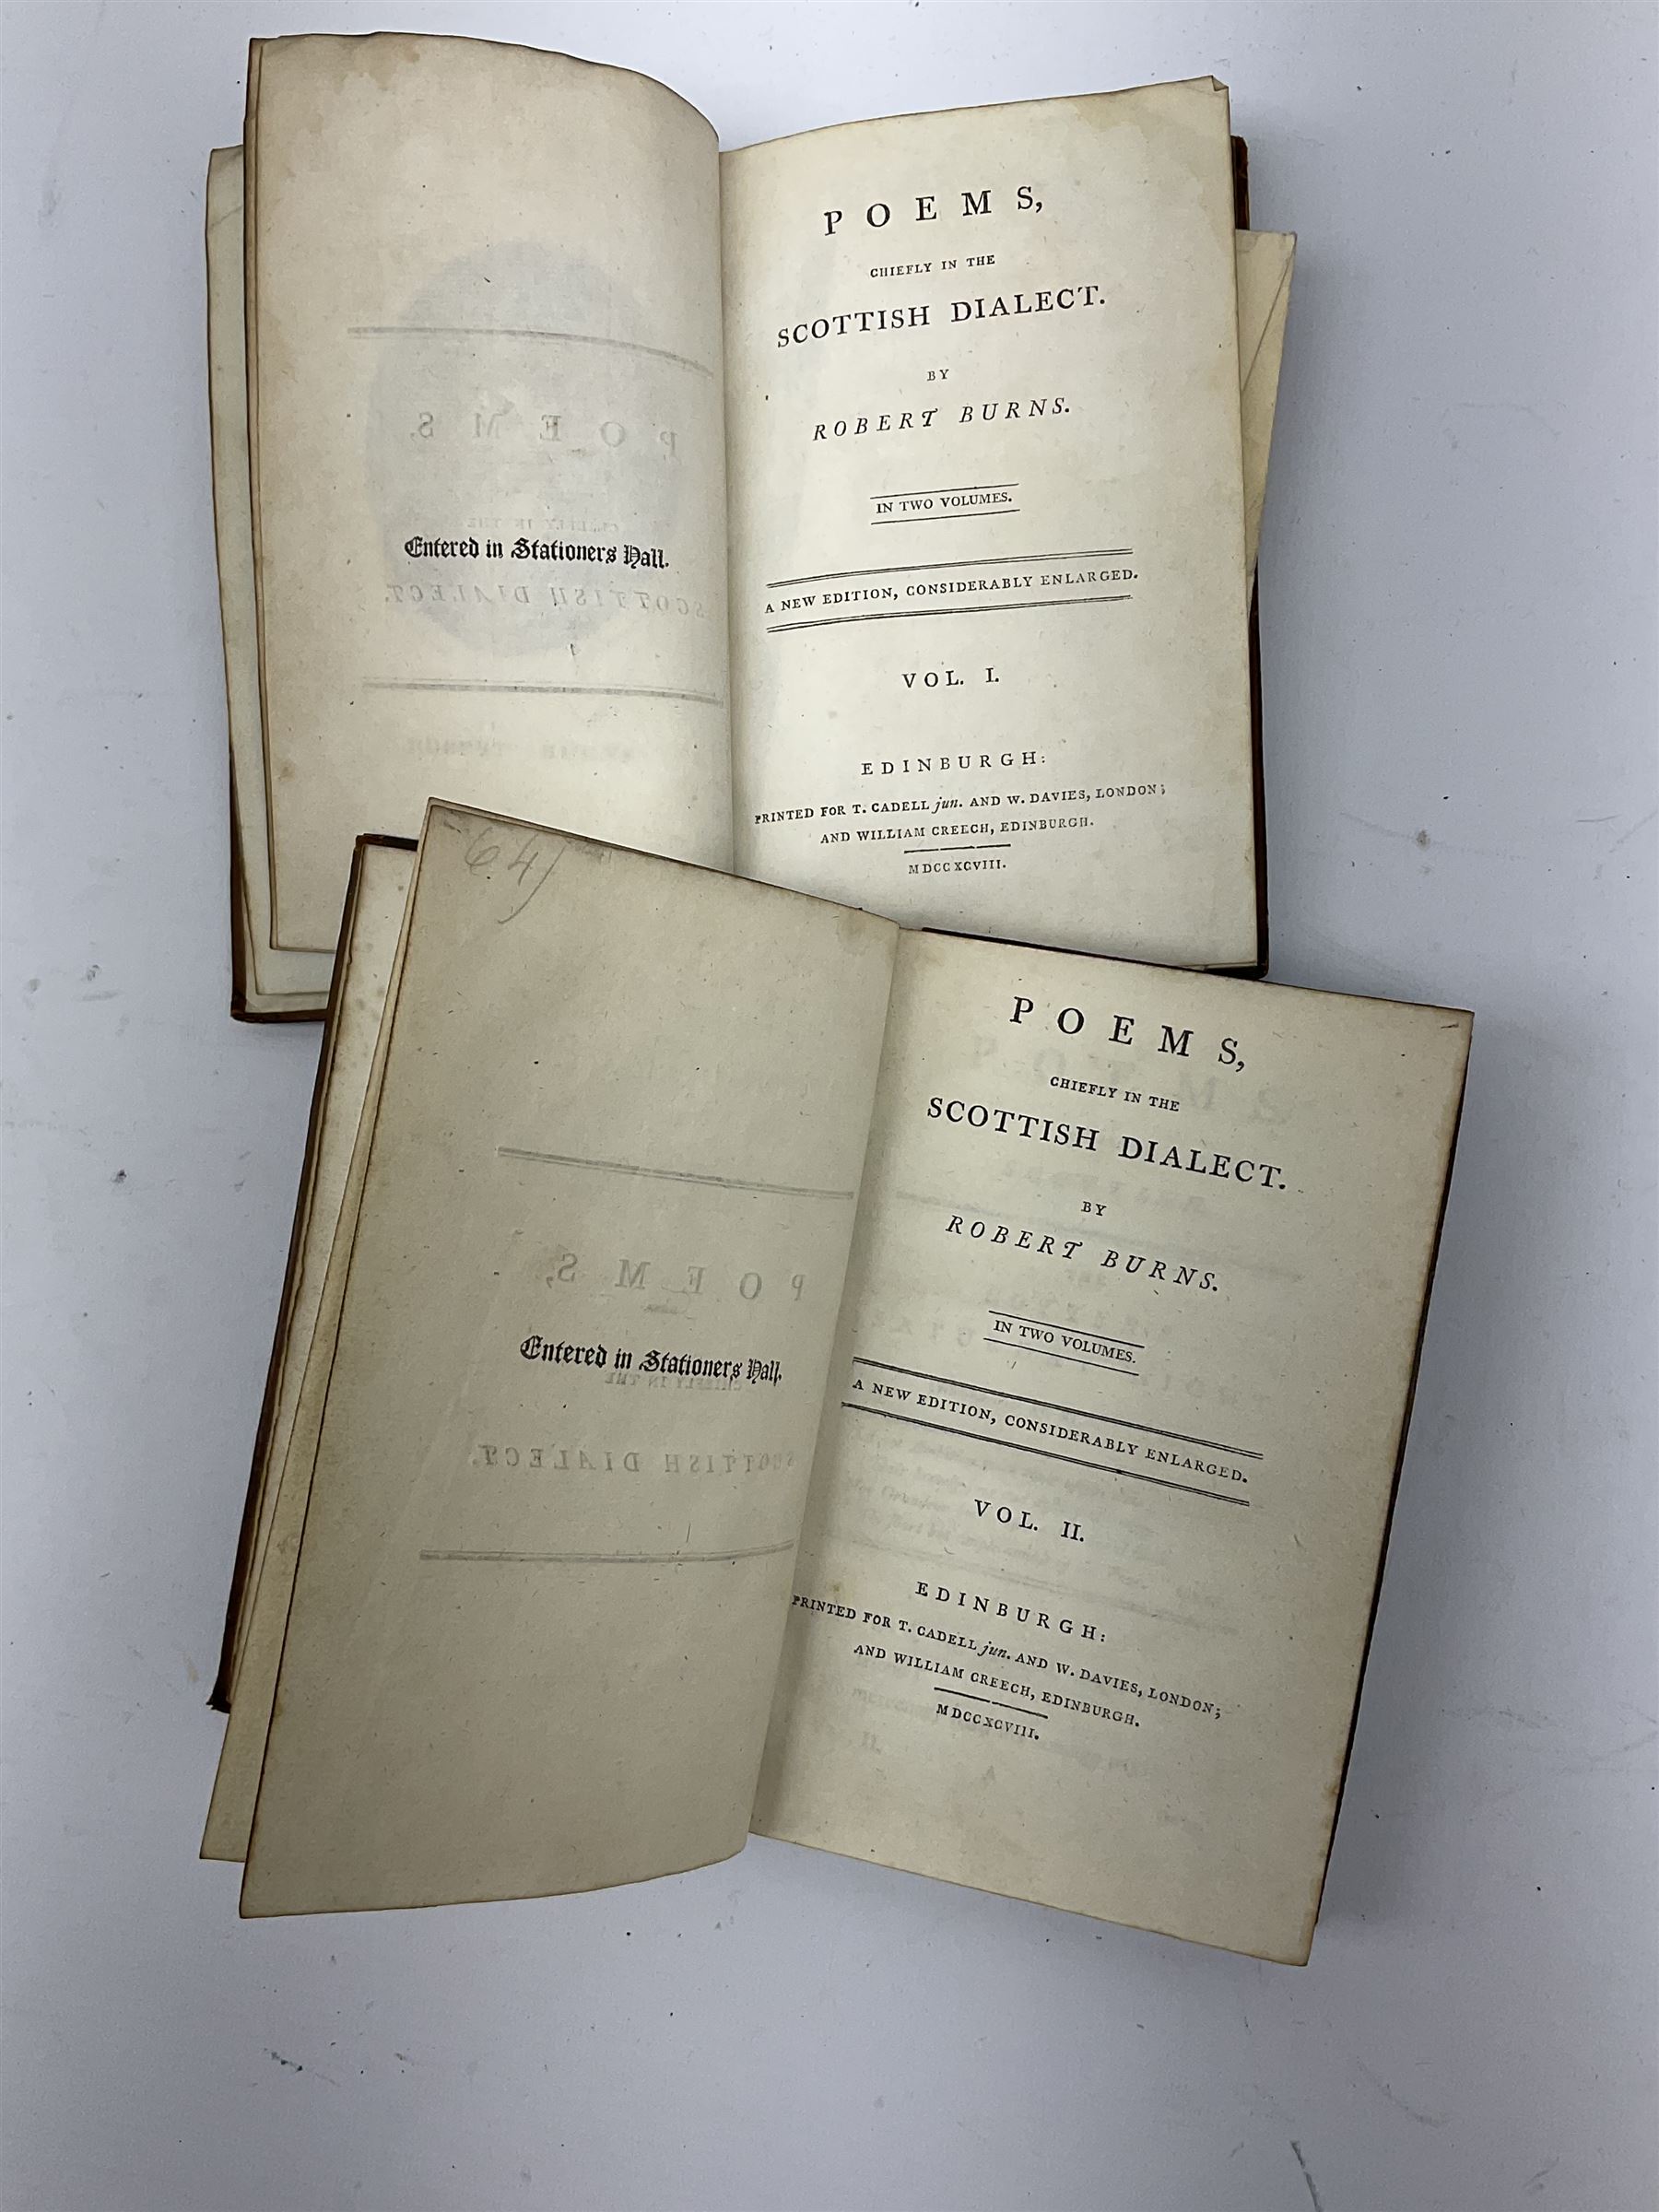 Robert Burns Poems, chiefly in the Scottish Dialect in 2 volumes ...